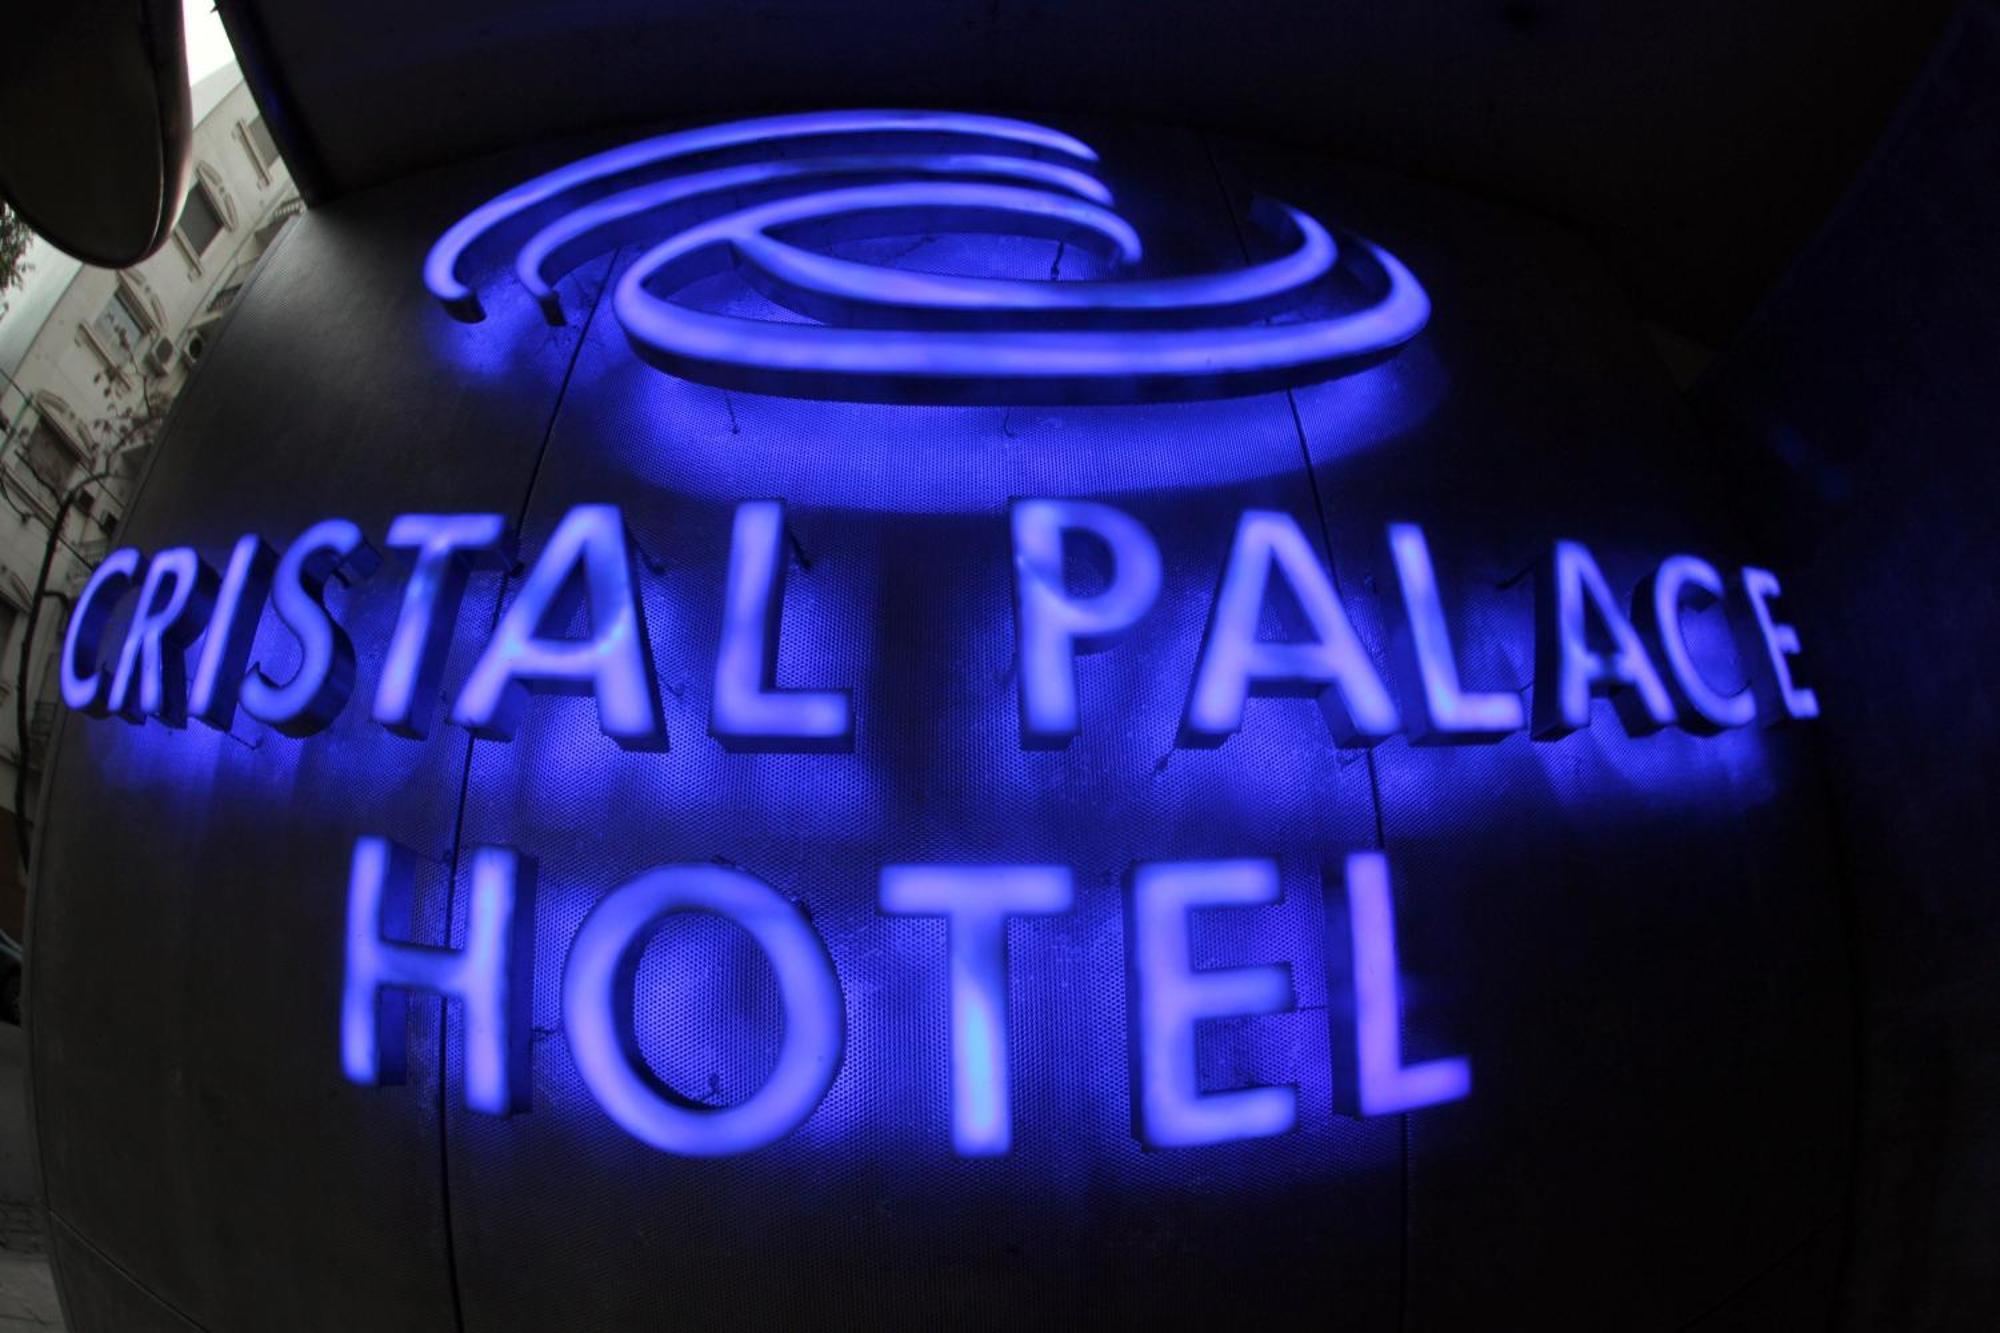 Cristal Palace Hotel Buenos Aires Buitenkant foto